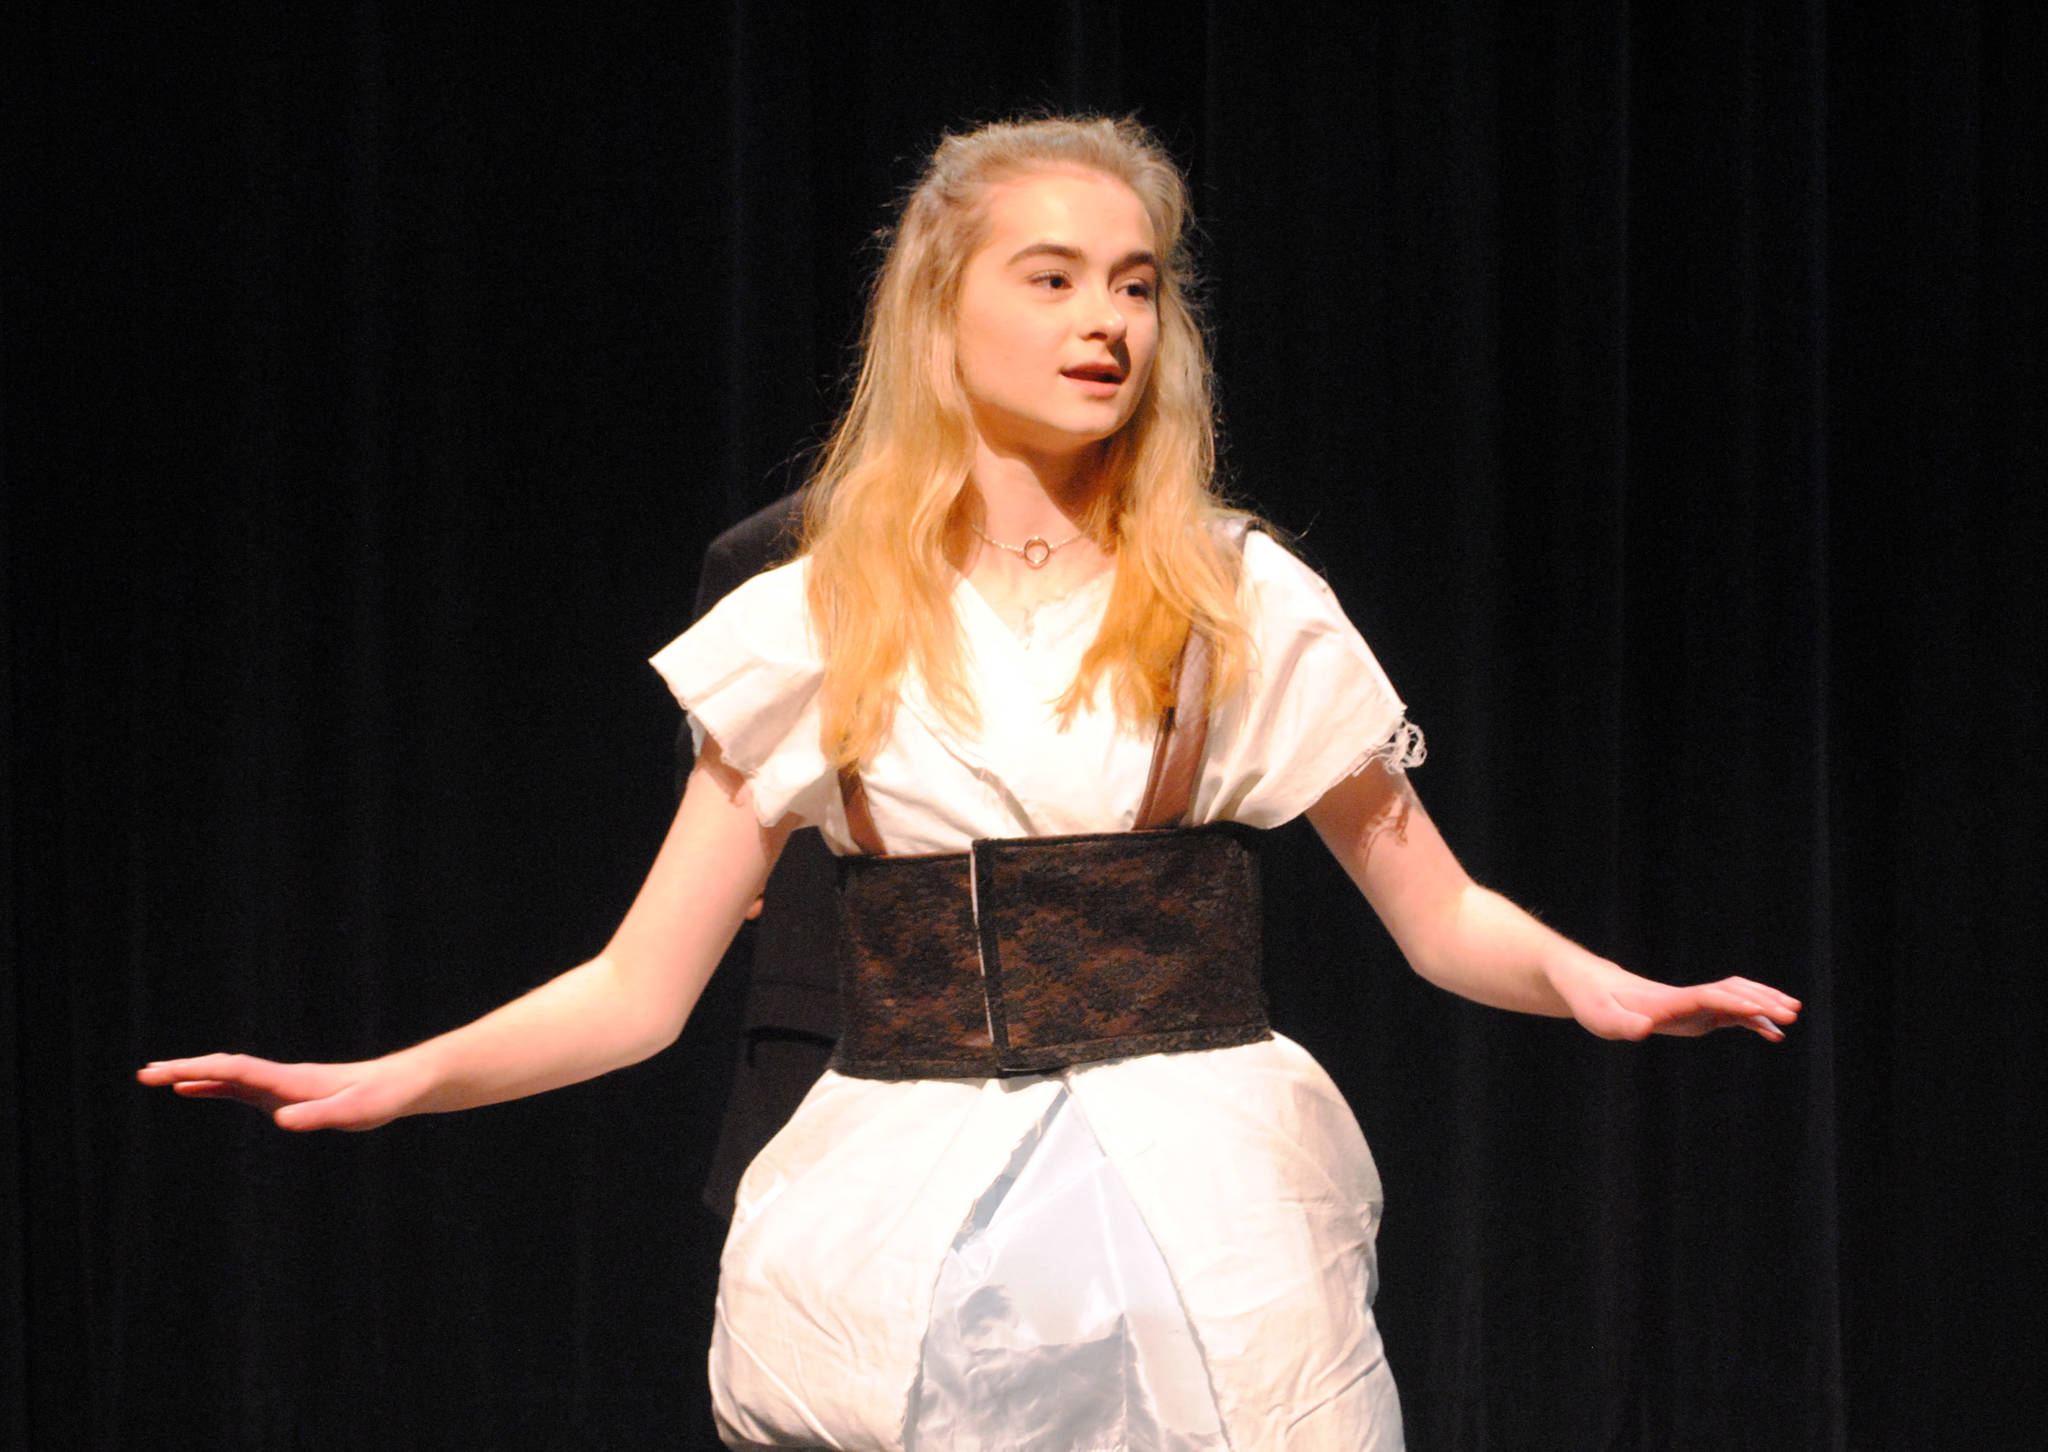 Anya Hondel rehearses a scene for the upcoming Soldotna High School musical Cinderella, which starts its run at the school’s auditorium tonight through Saturday with performances starting at 6:30 p.m. (Photo by Kat Sorensen/Peninsula Clarion)